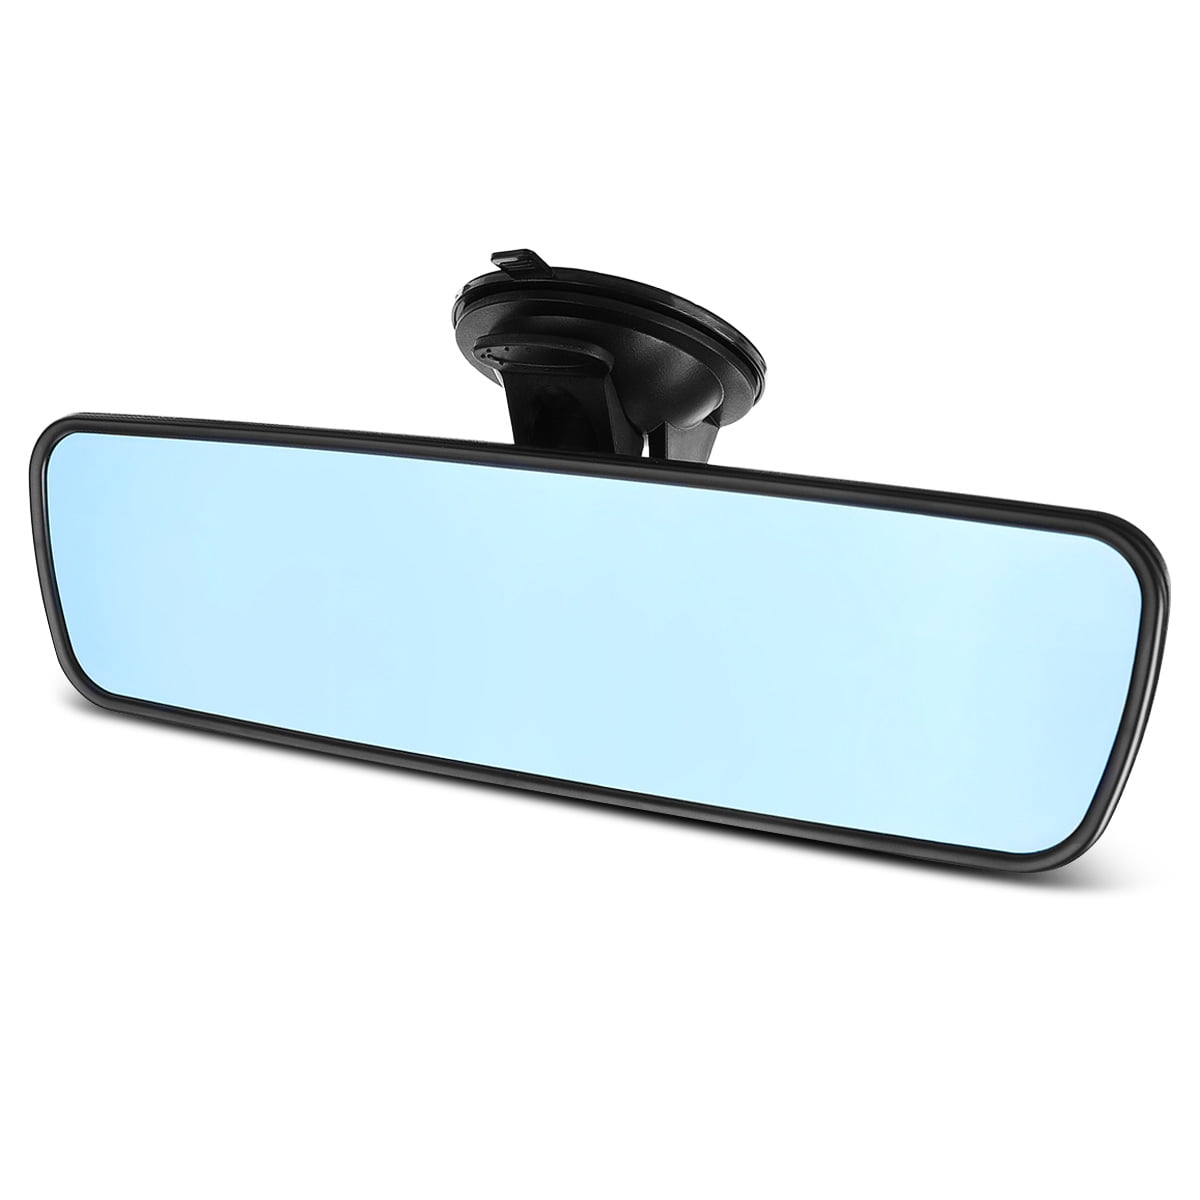 ELUTO Anti-Glare Rear View Mirror Rearview Mirror Universal Interior Rearview Mirror with Suction Cup for Car Truck SUV 9.5'' 240mm 